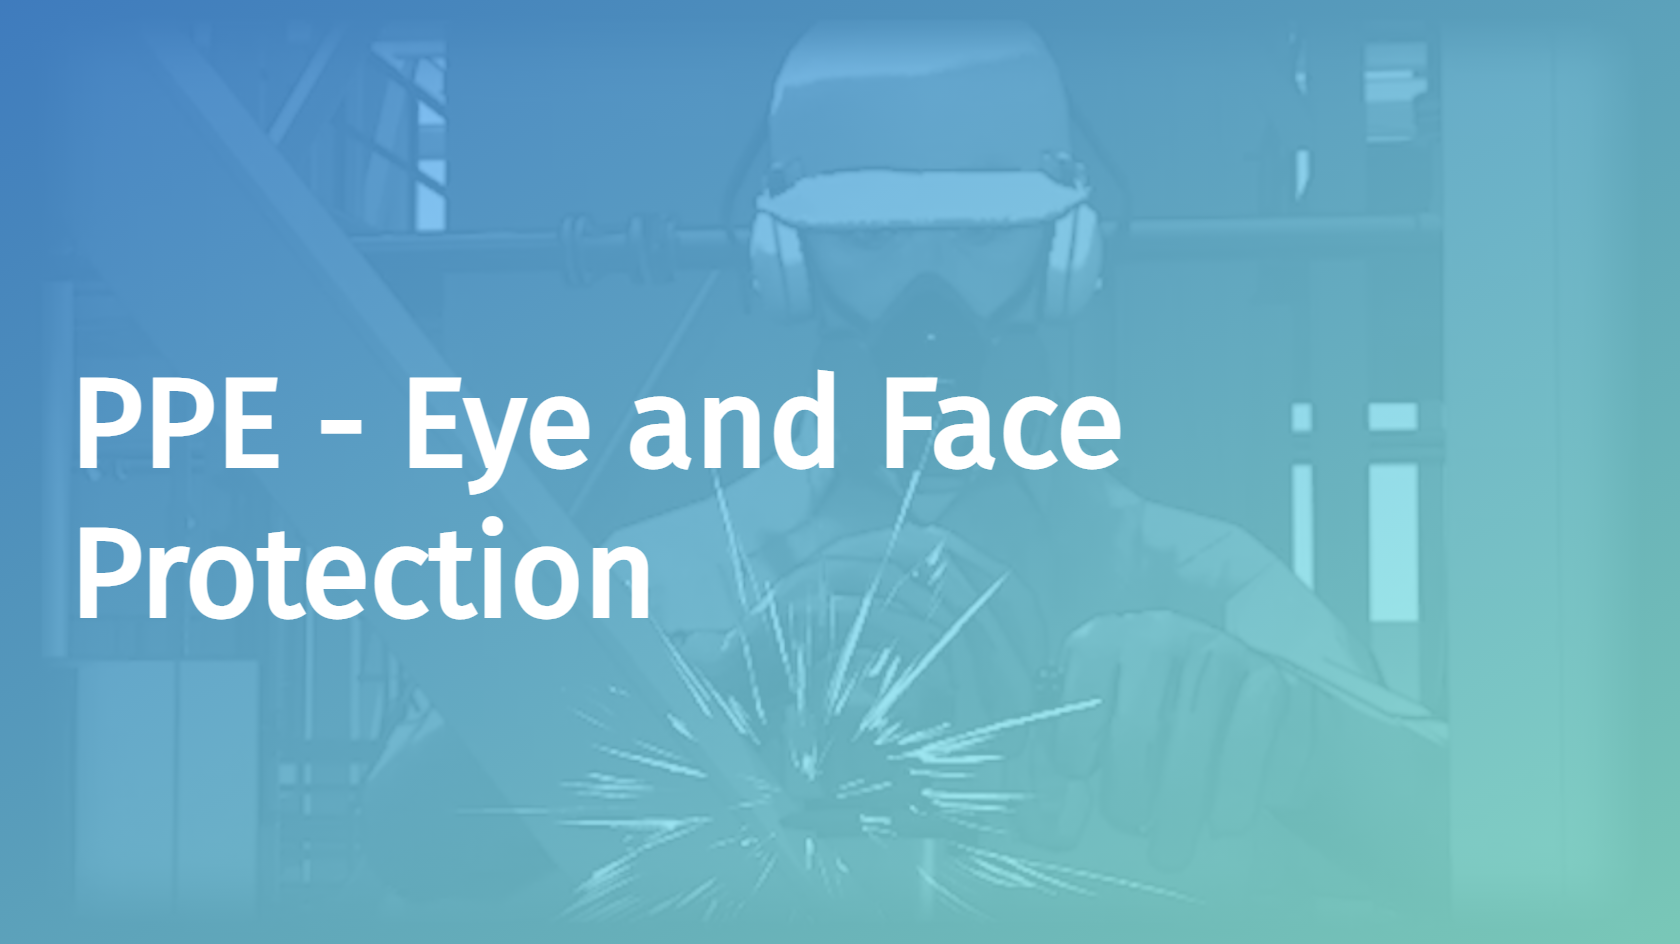 PPE - Eye and Face Protection